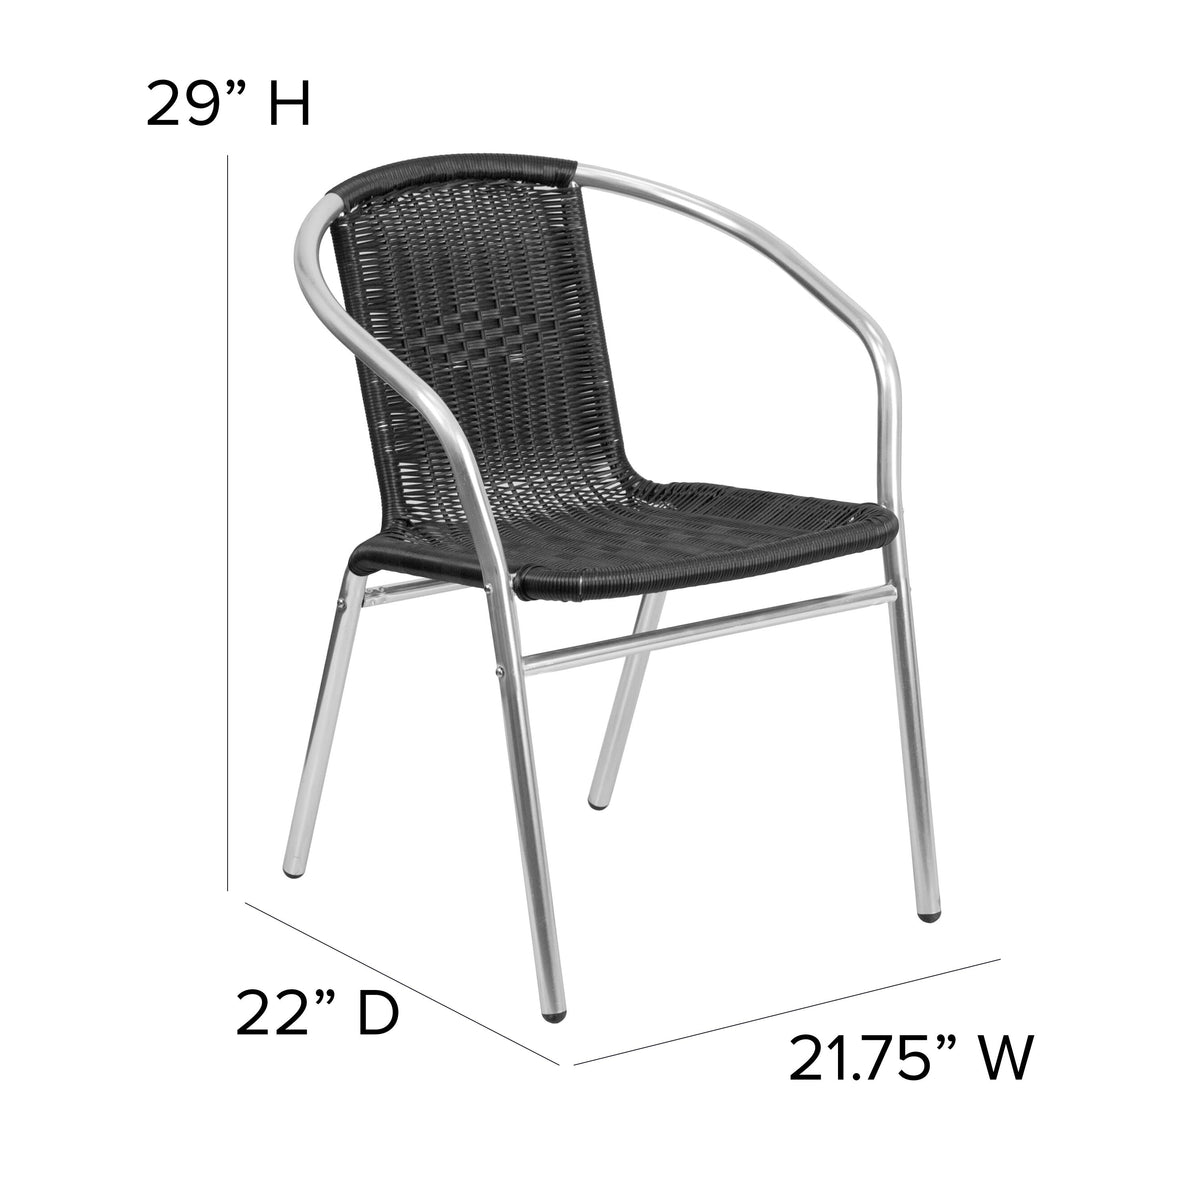 Aluminum and Black |#| Commercial Aluminum and Black Rattan Indoor-Outdoor Restaurant Stack Chair